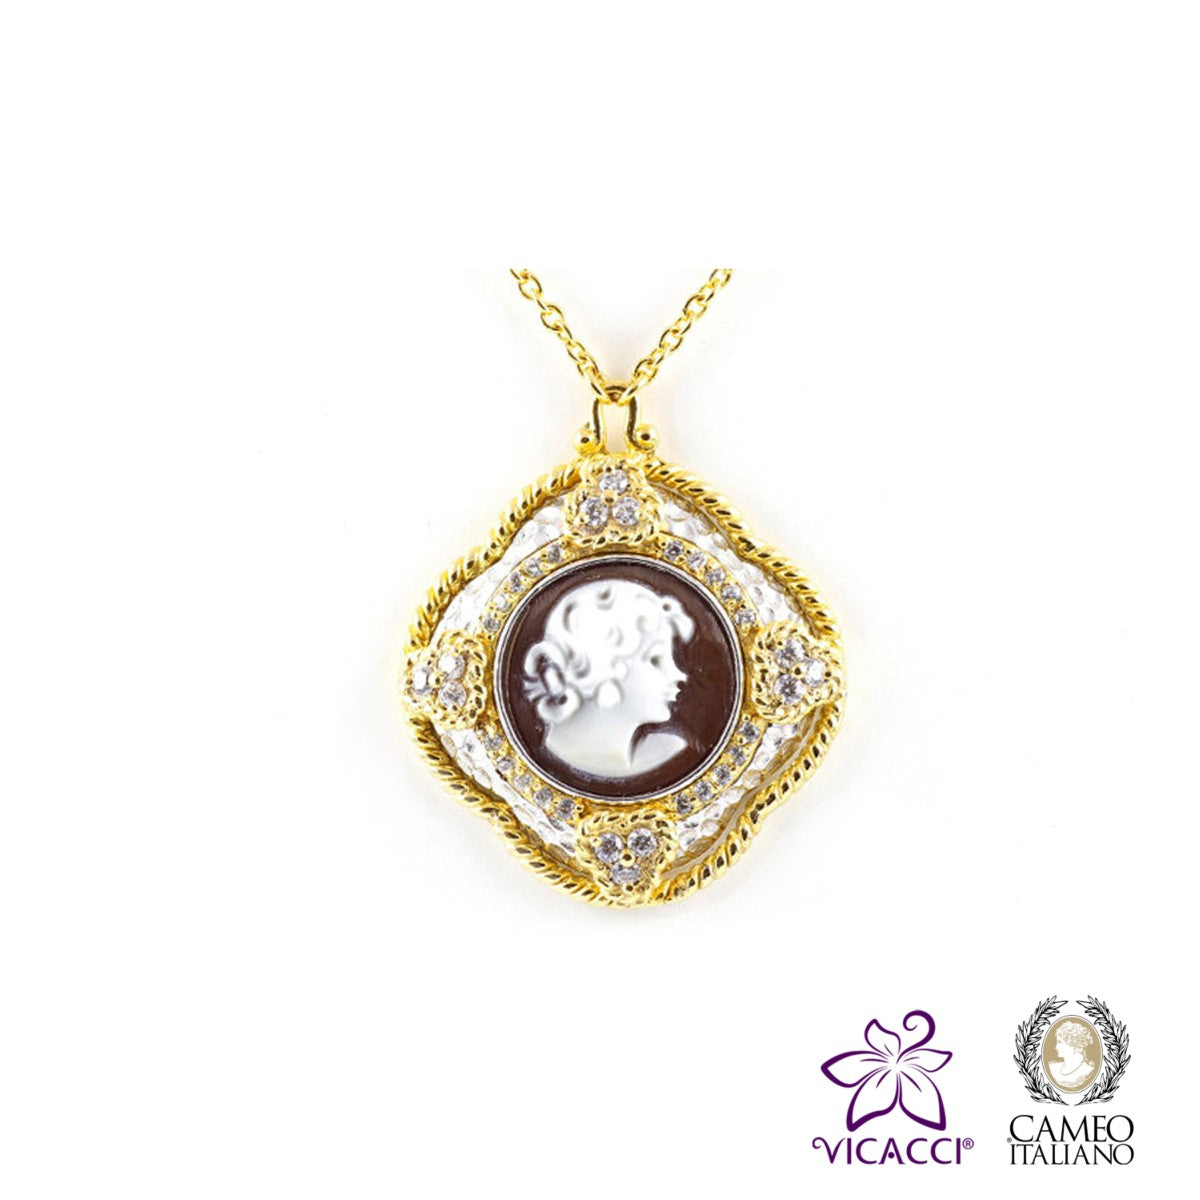 Cameo Italiano, C52 Necklace , Gold Plated Sterling Silver